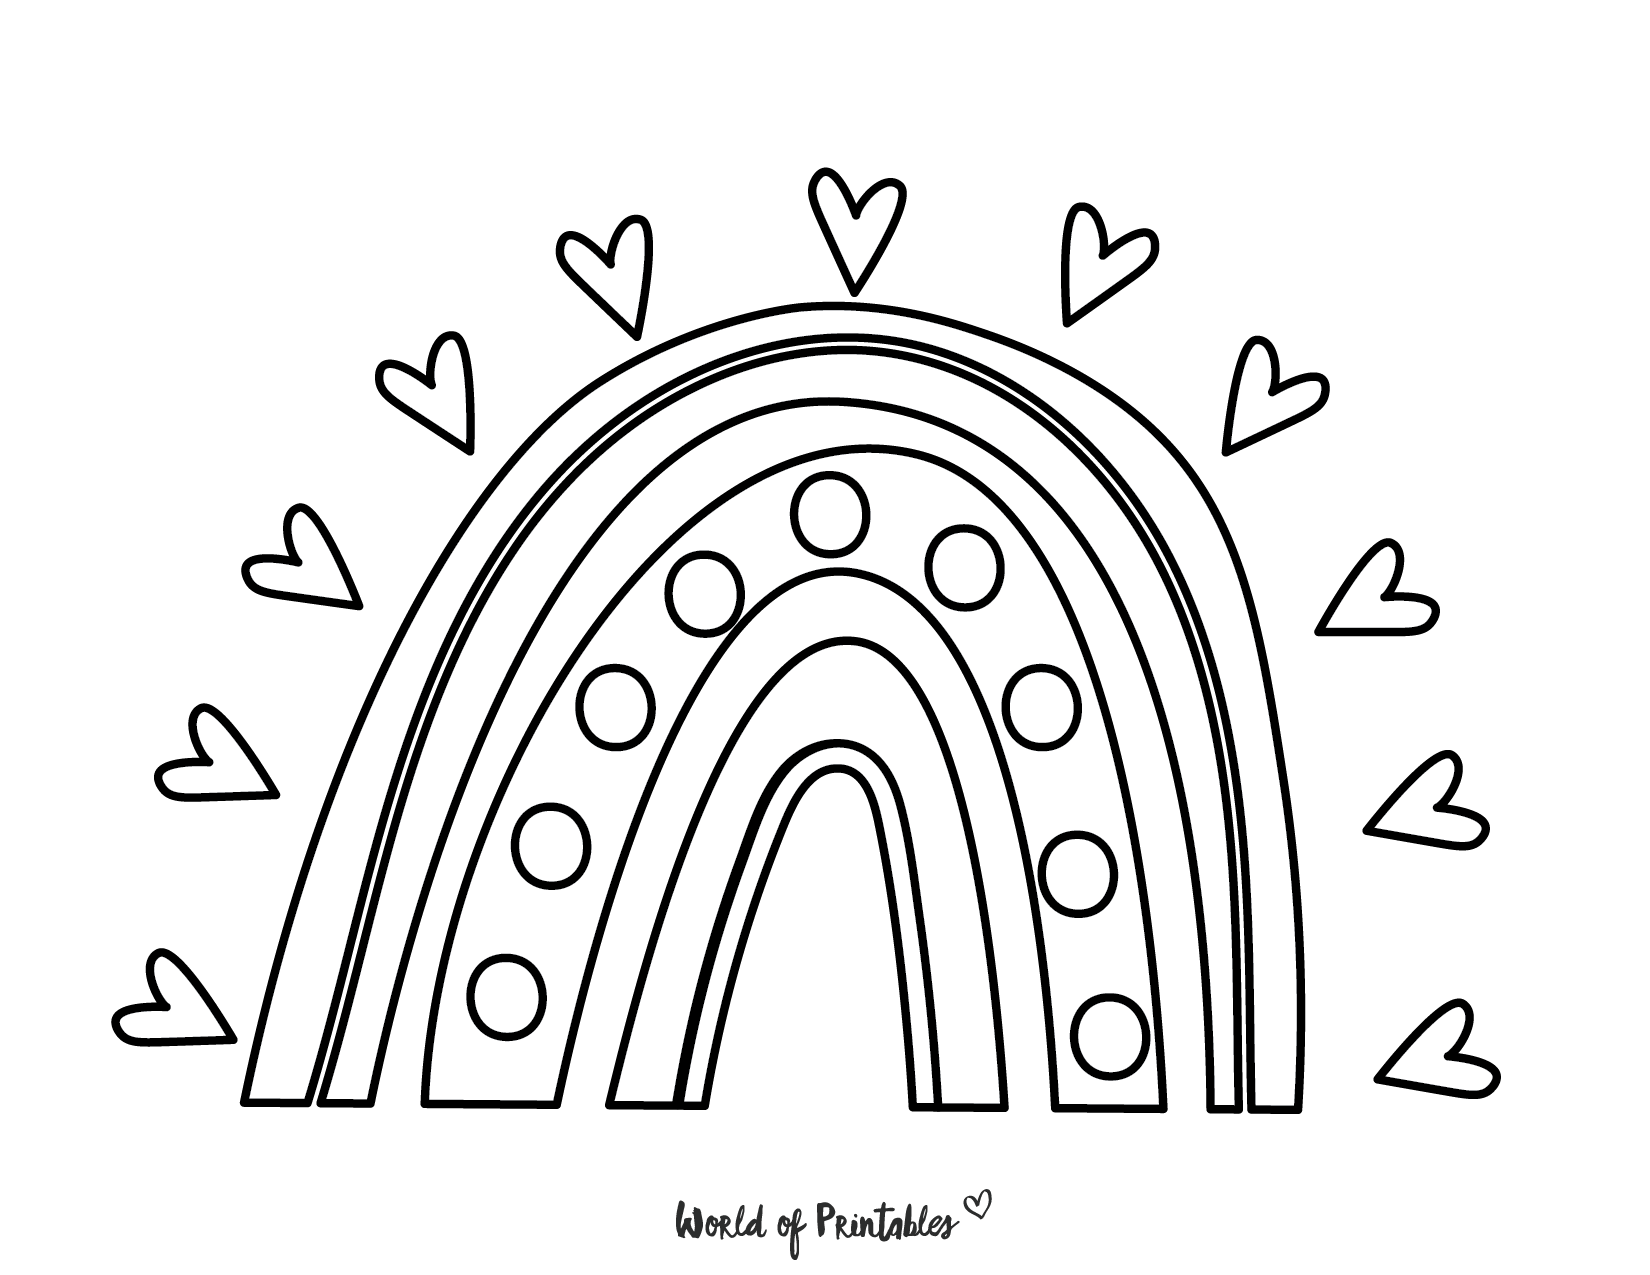 20 Best Rainbow Coloring Pages To Brighten Your Day   World of ...